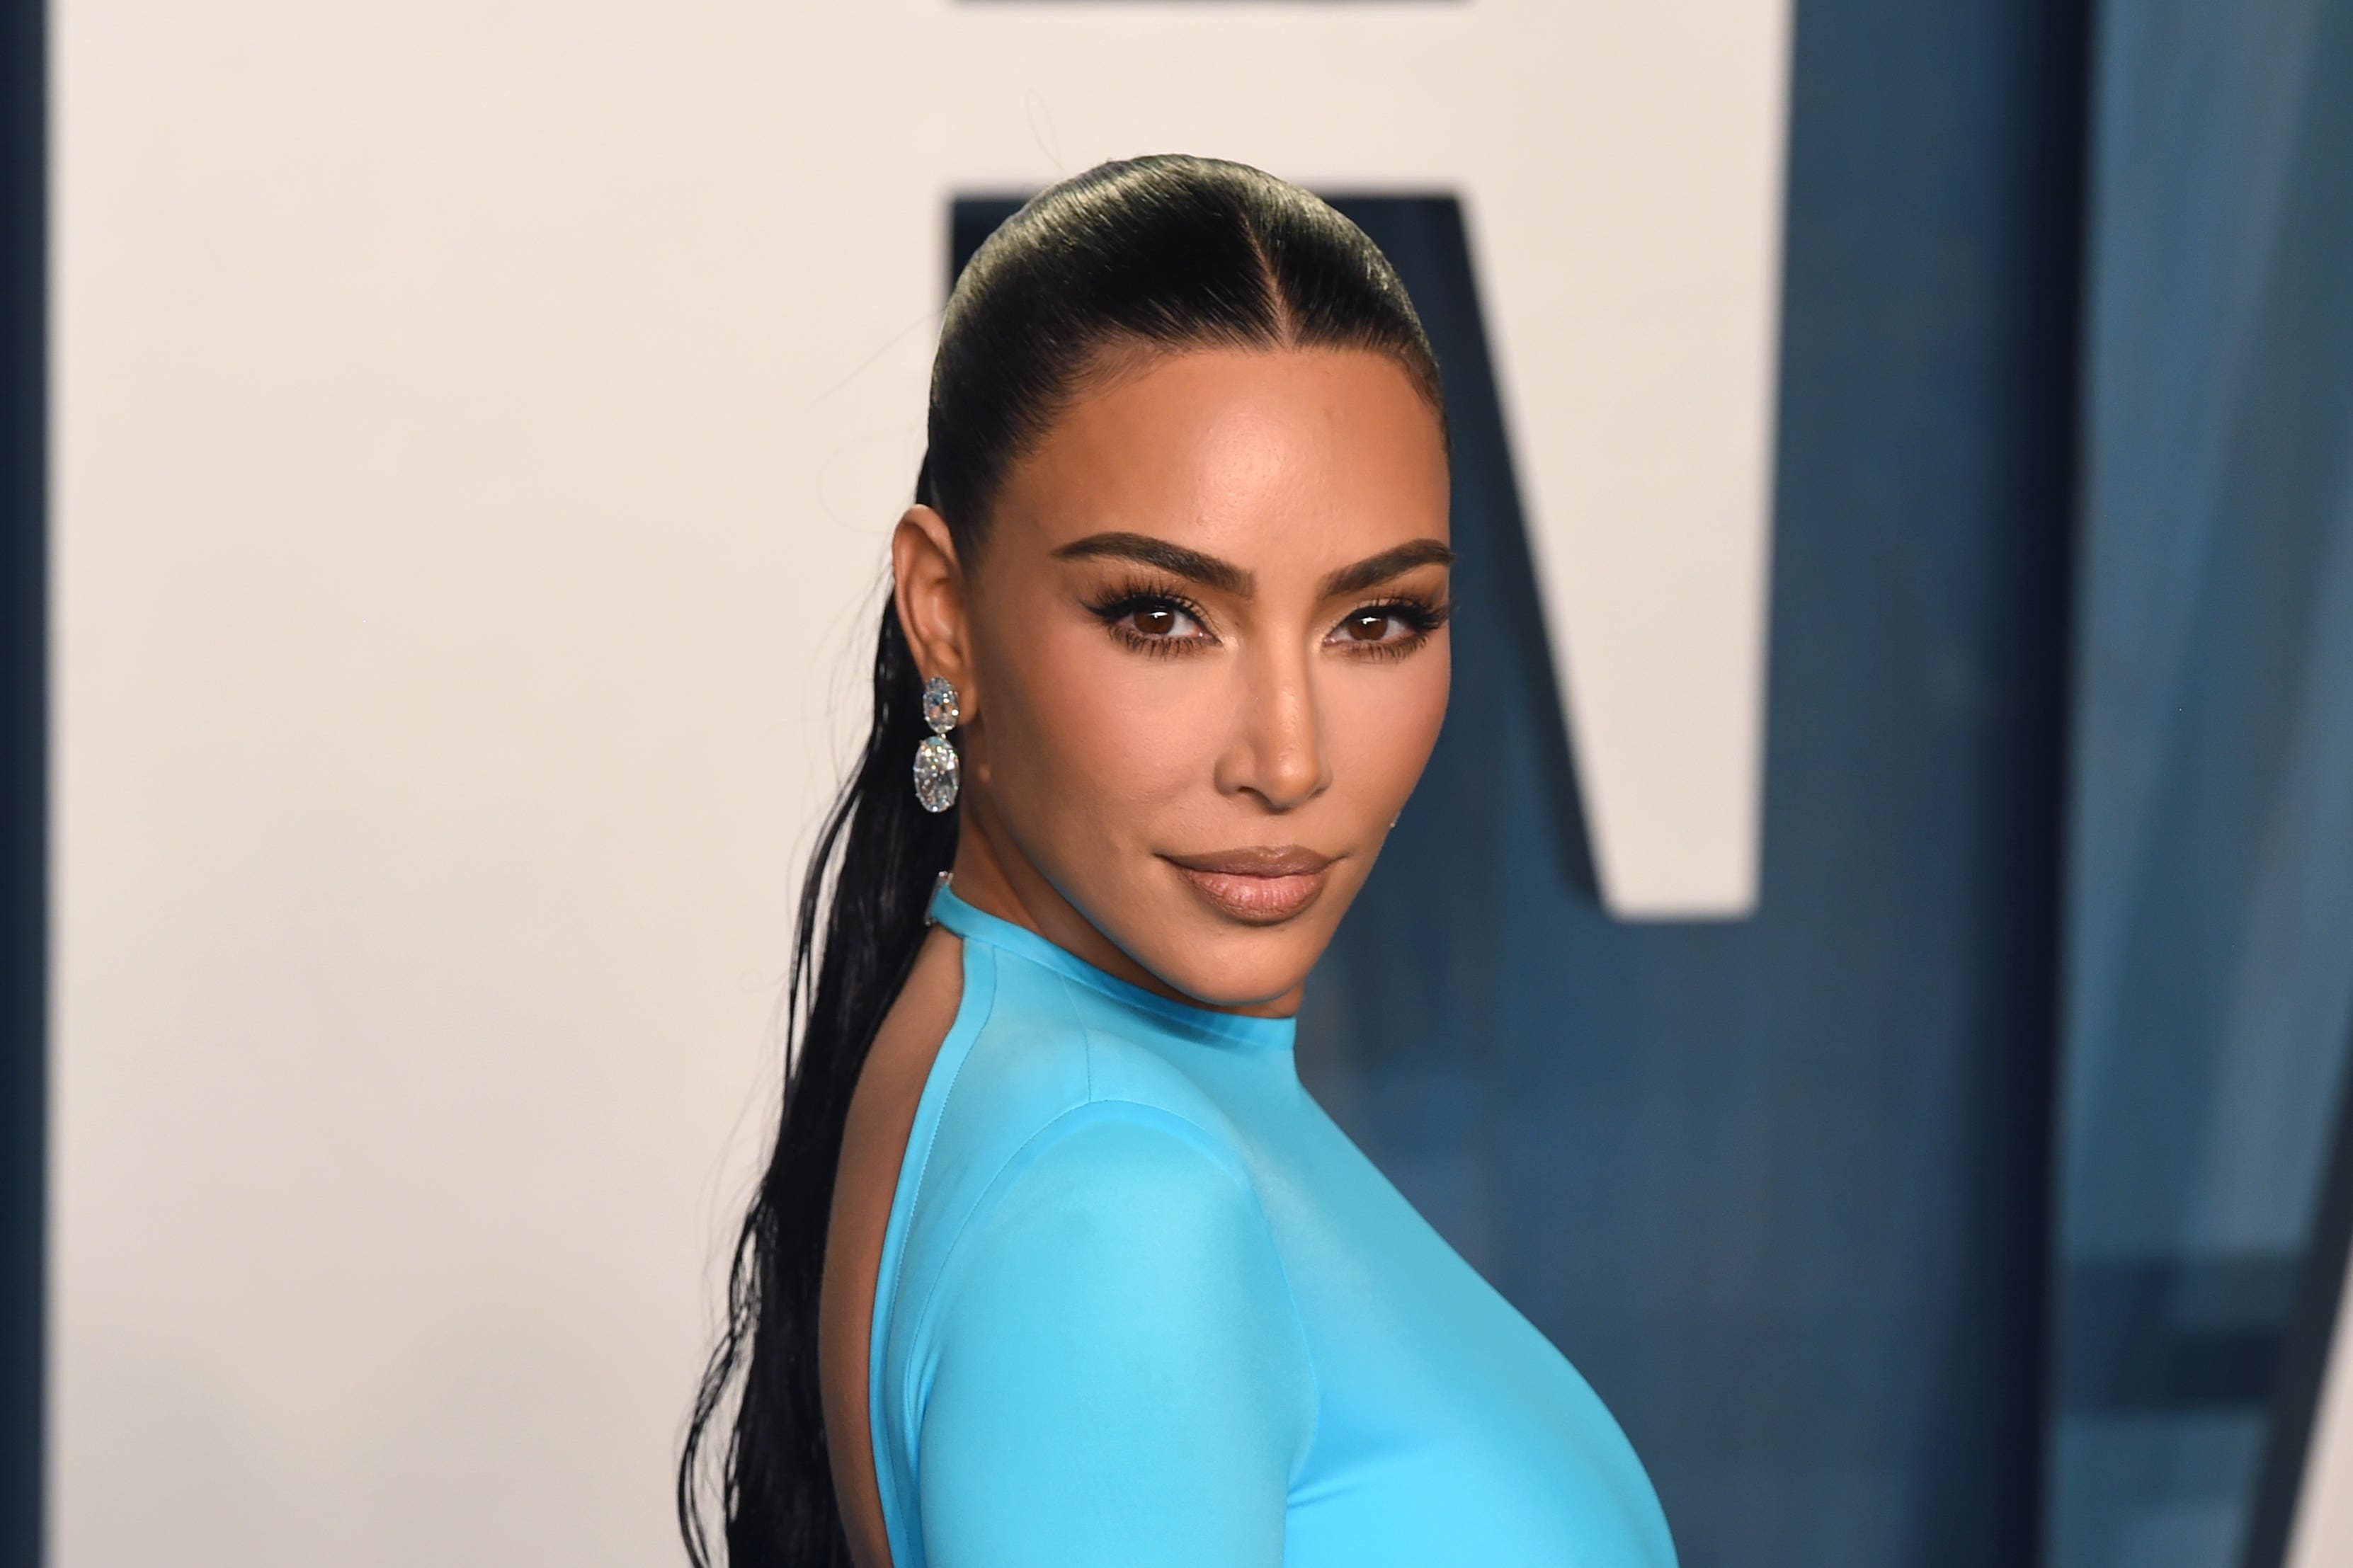 Kim Kardashian teams up with stars of The White Lotus for new